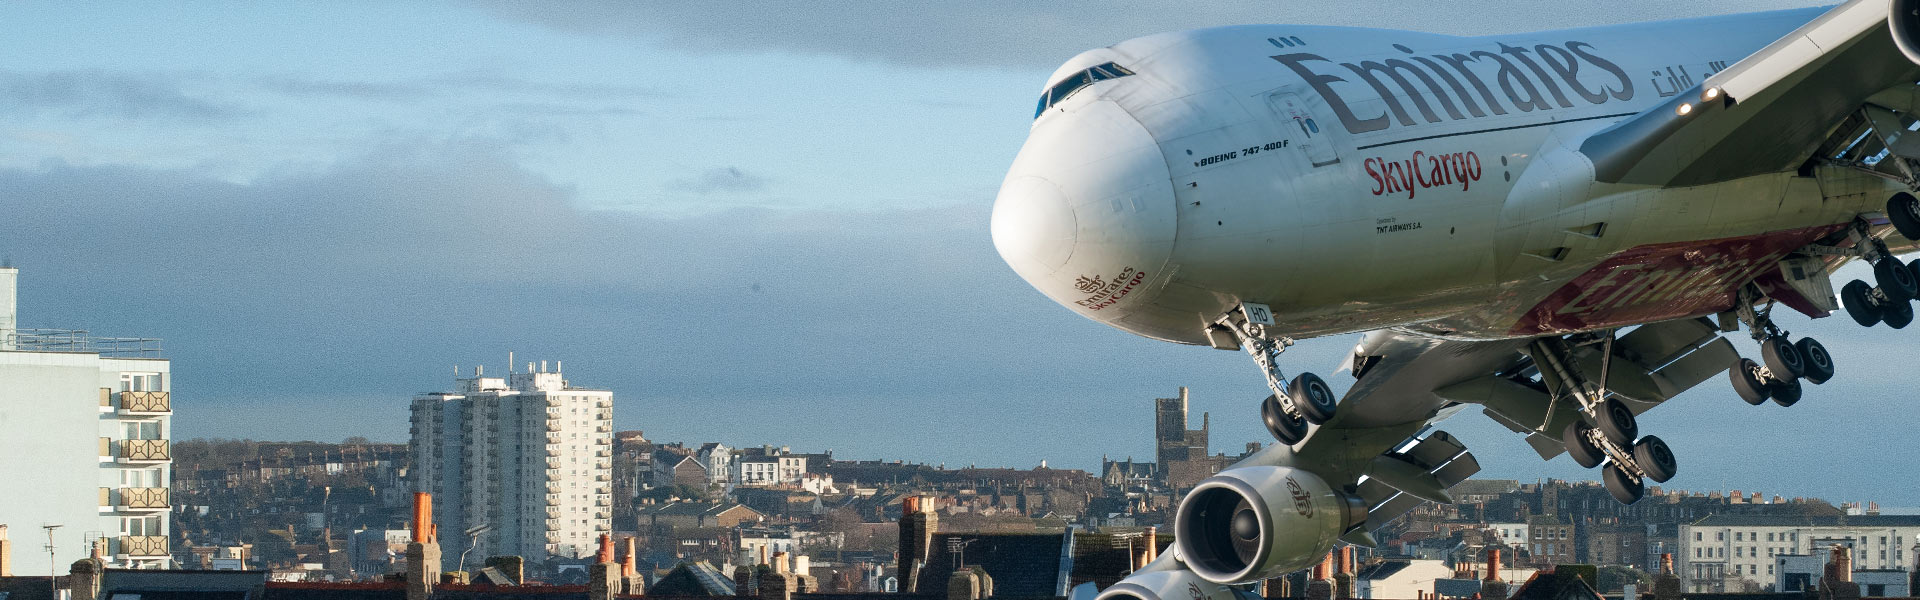 Montage image of an air freight Boing 747 and the Ramsgate skyline.